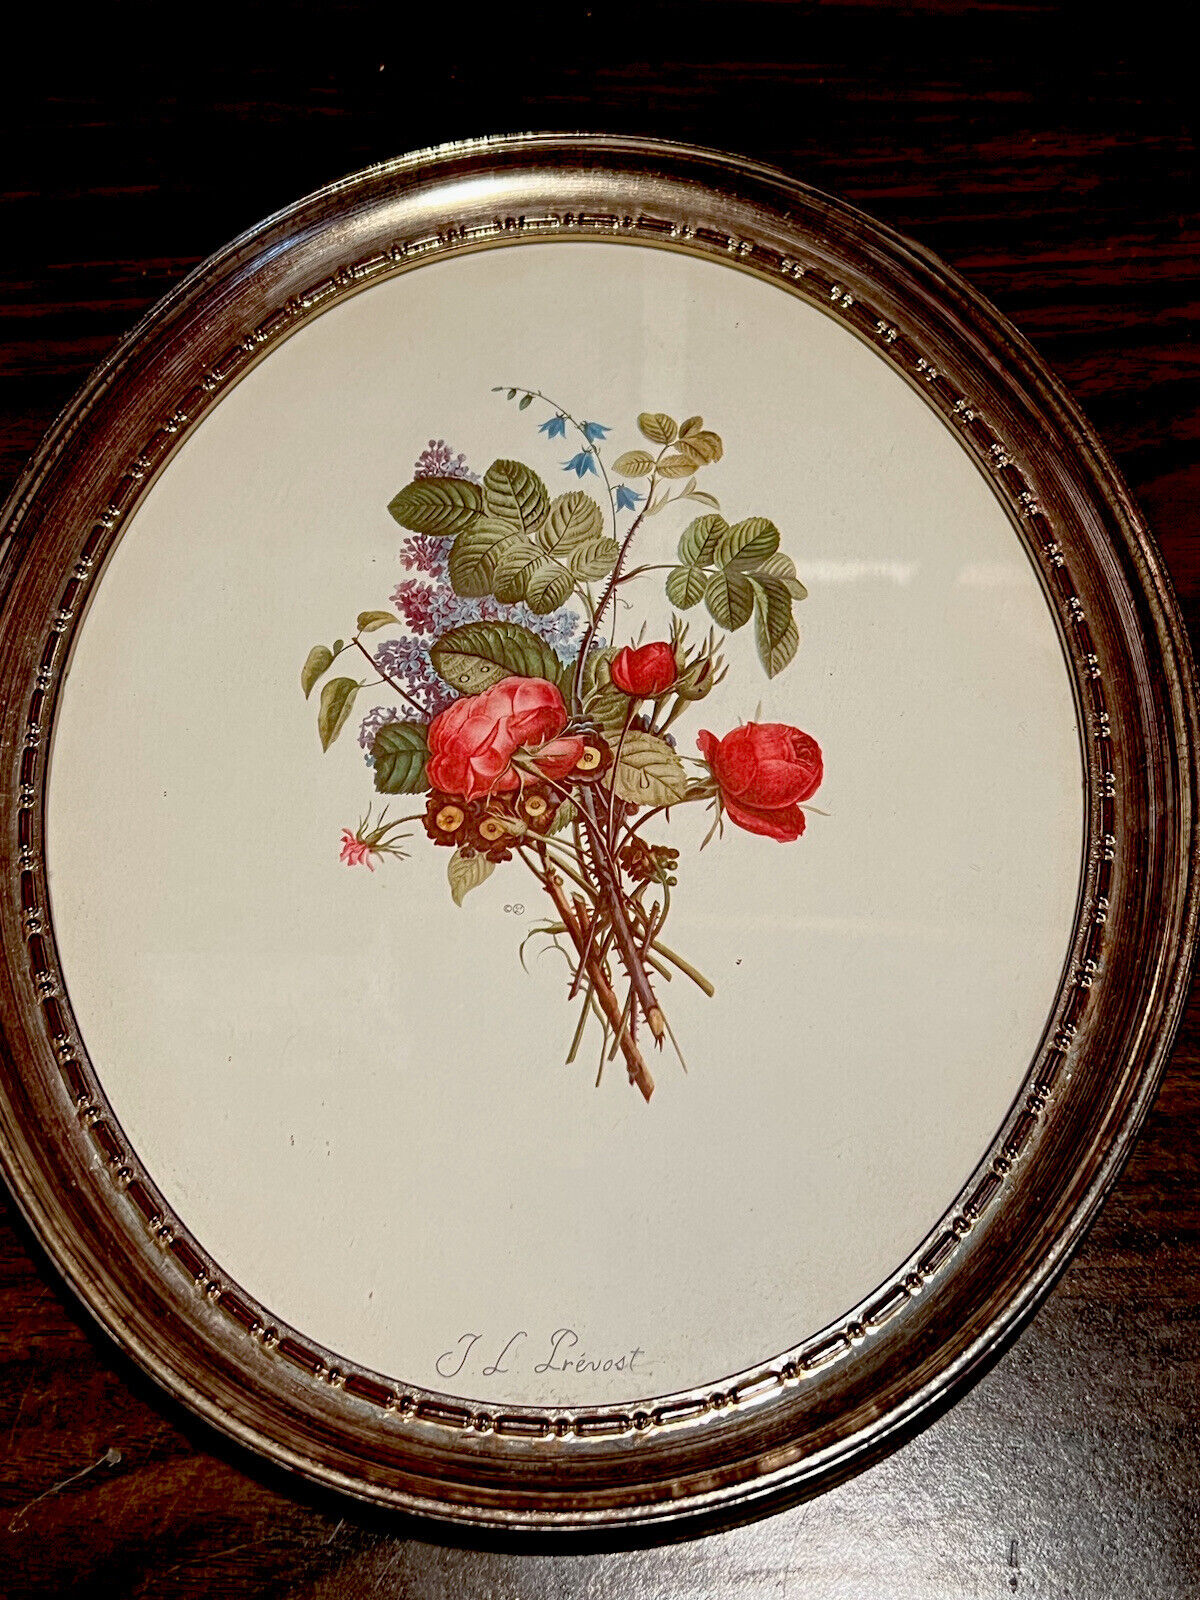 Vintage Oval Picture Frame with Flower Print 8x10 TruArt Product JL Prevost